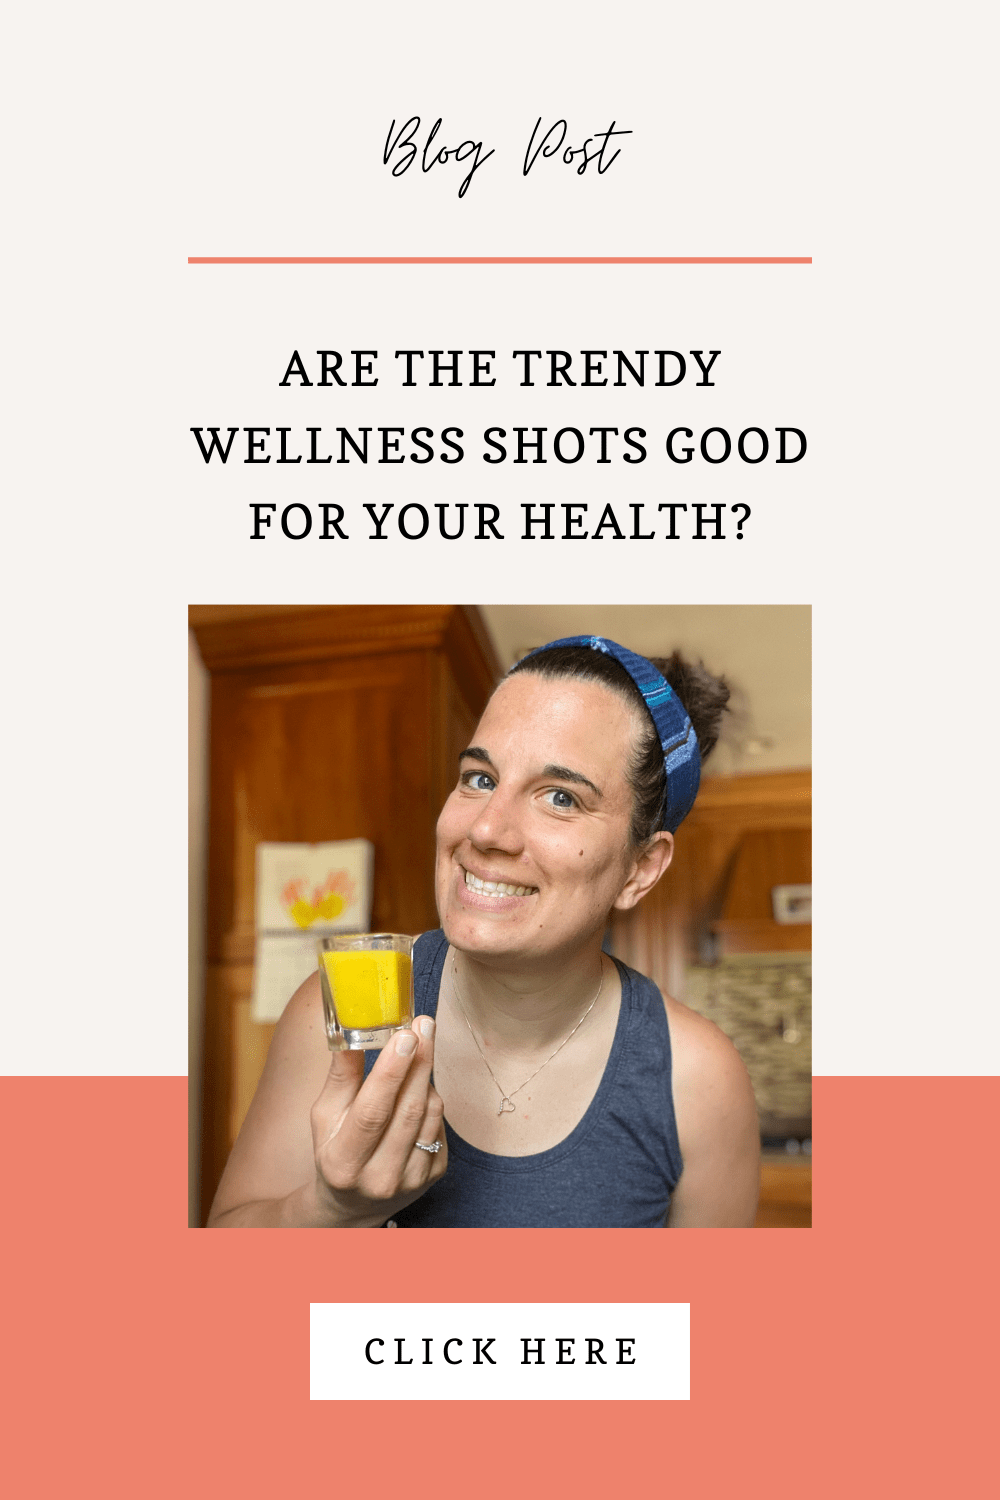 Are Morning Wellness Shots Good For You?